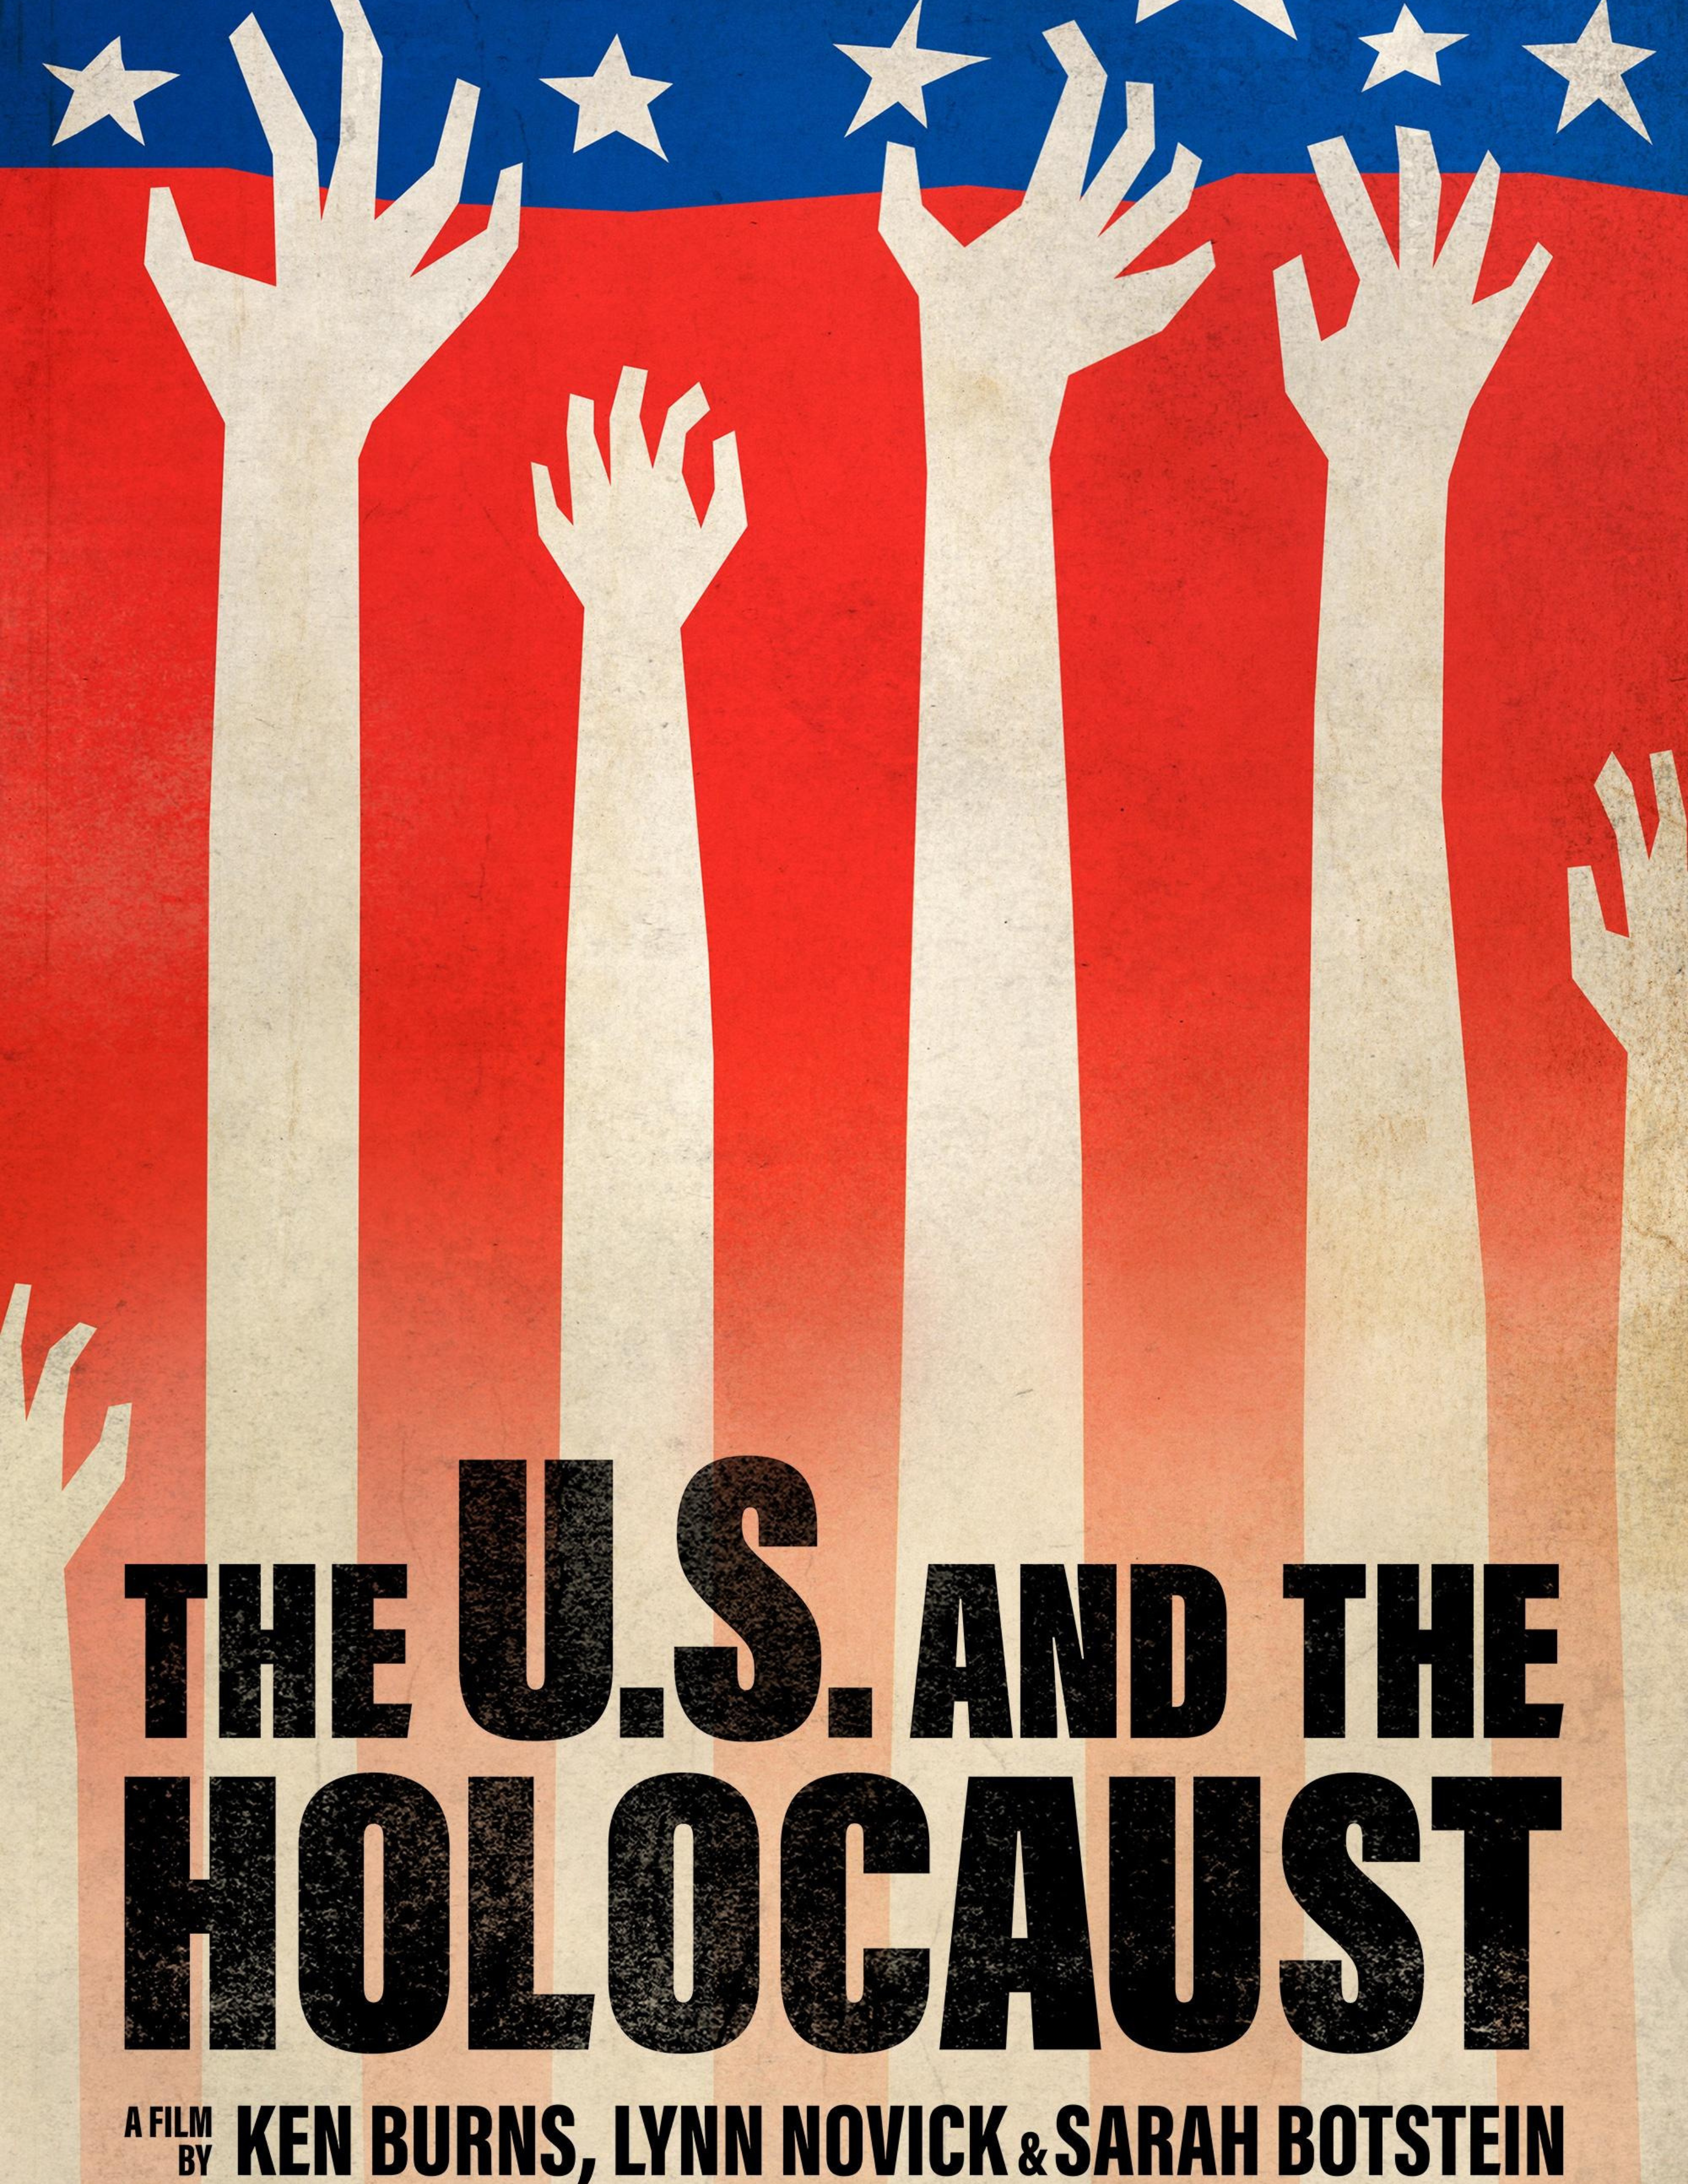 The US and the Holocaust A Ken Burns documentary hands reaching up with American flag